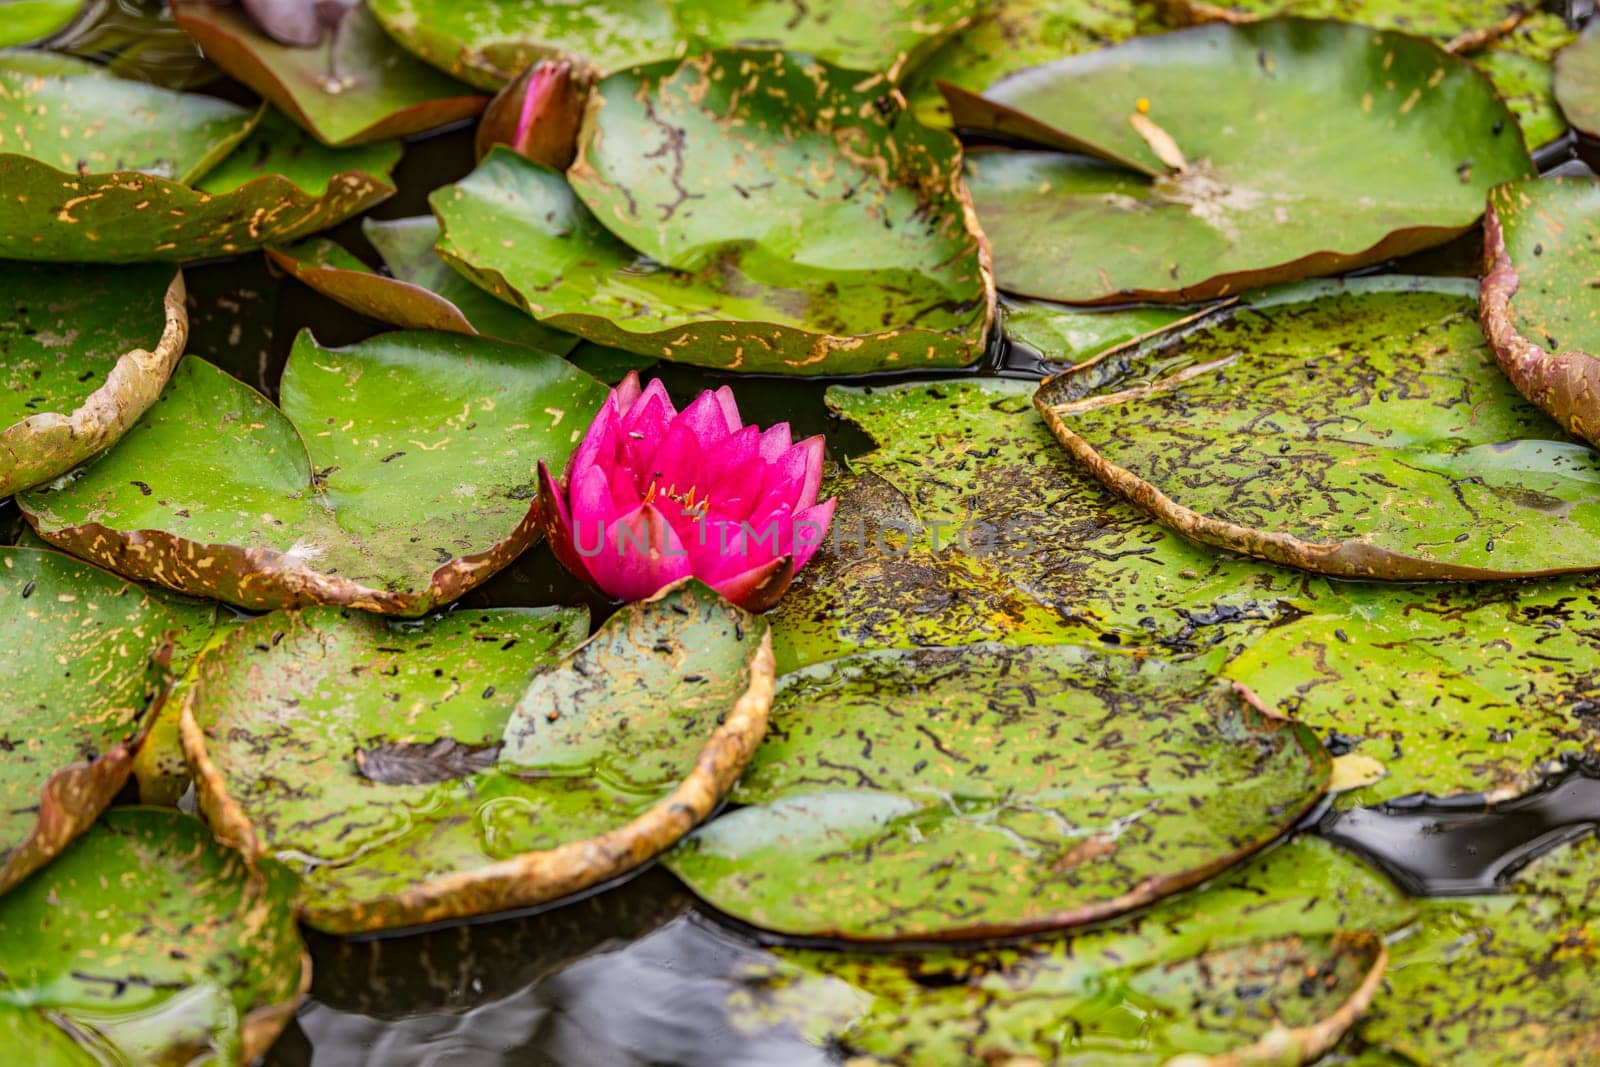 A colorful purple water lily flower with large green leaves on a garden pond with water